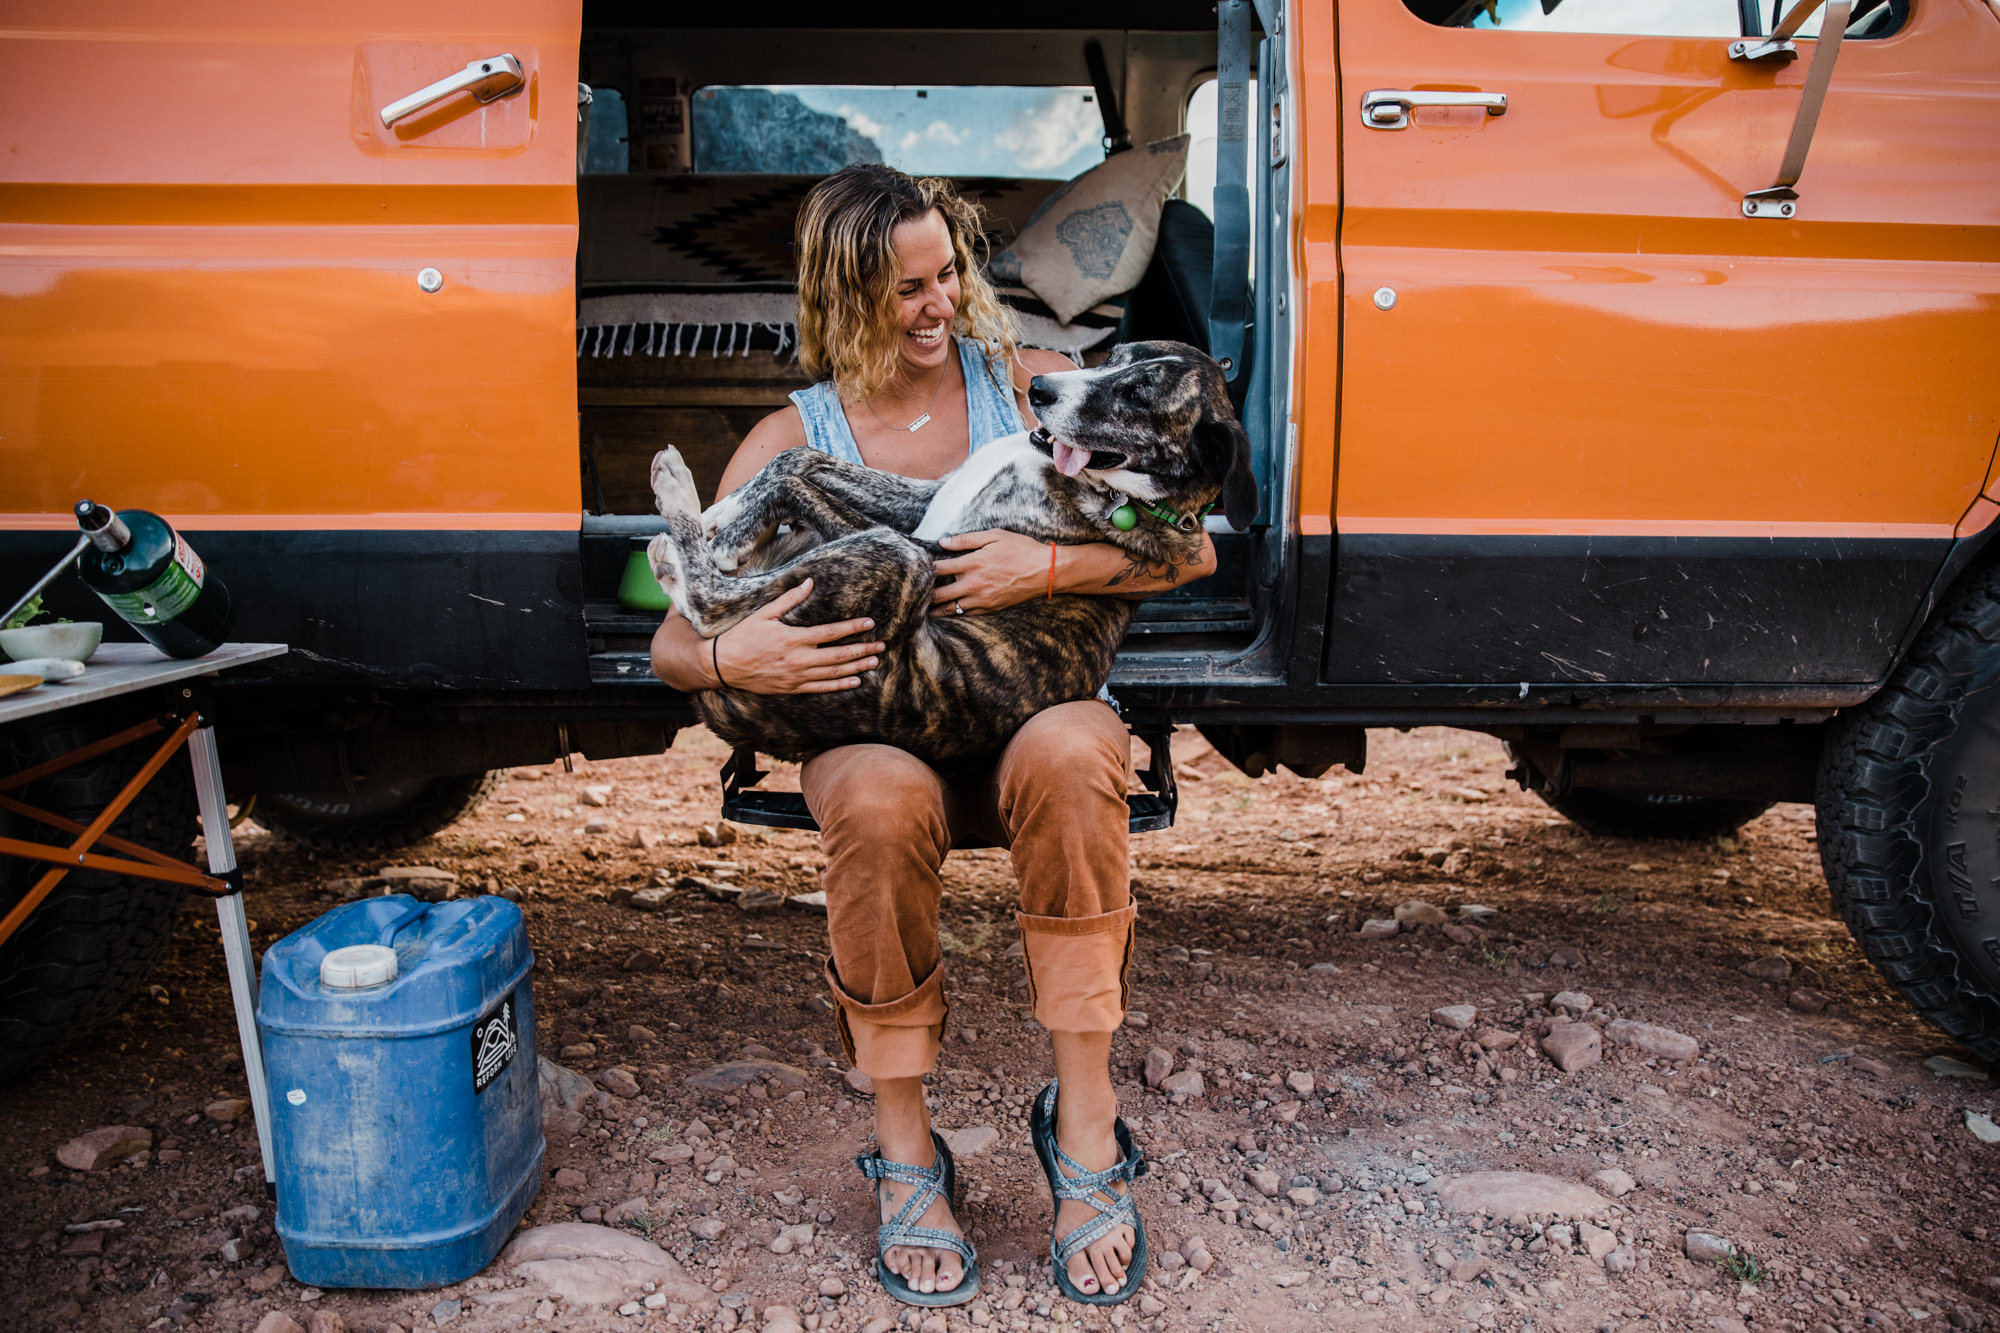 bri + keith madia | van life in the utah desert | never leave the dogs behind | the hearnes adventure photography for ruffwear | www.thehearnes.com